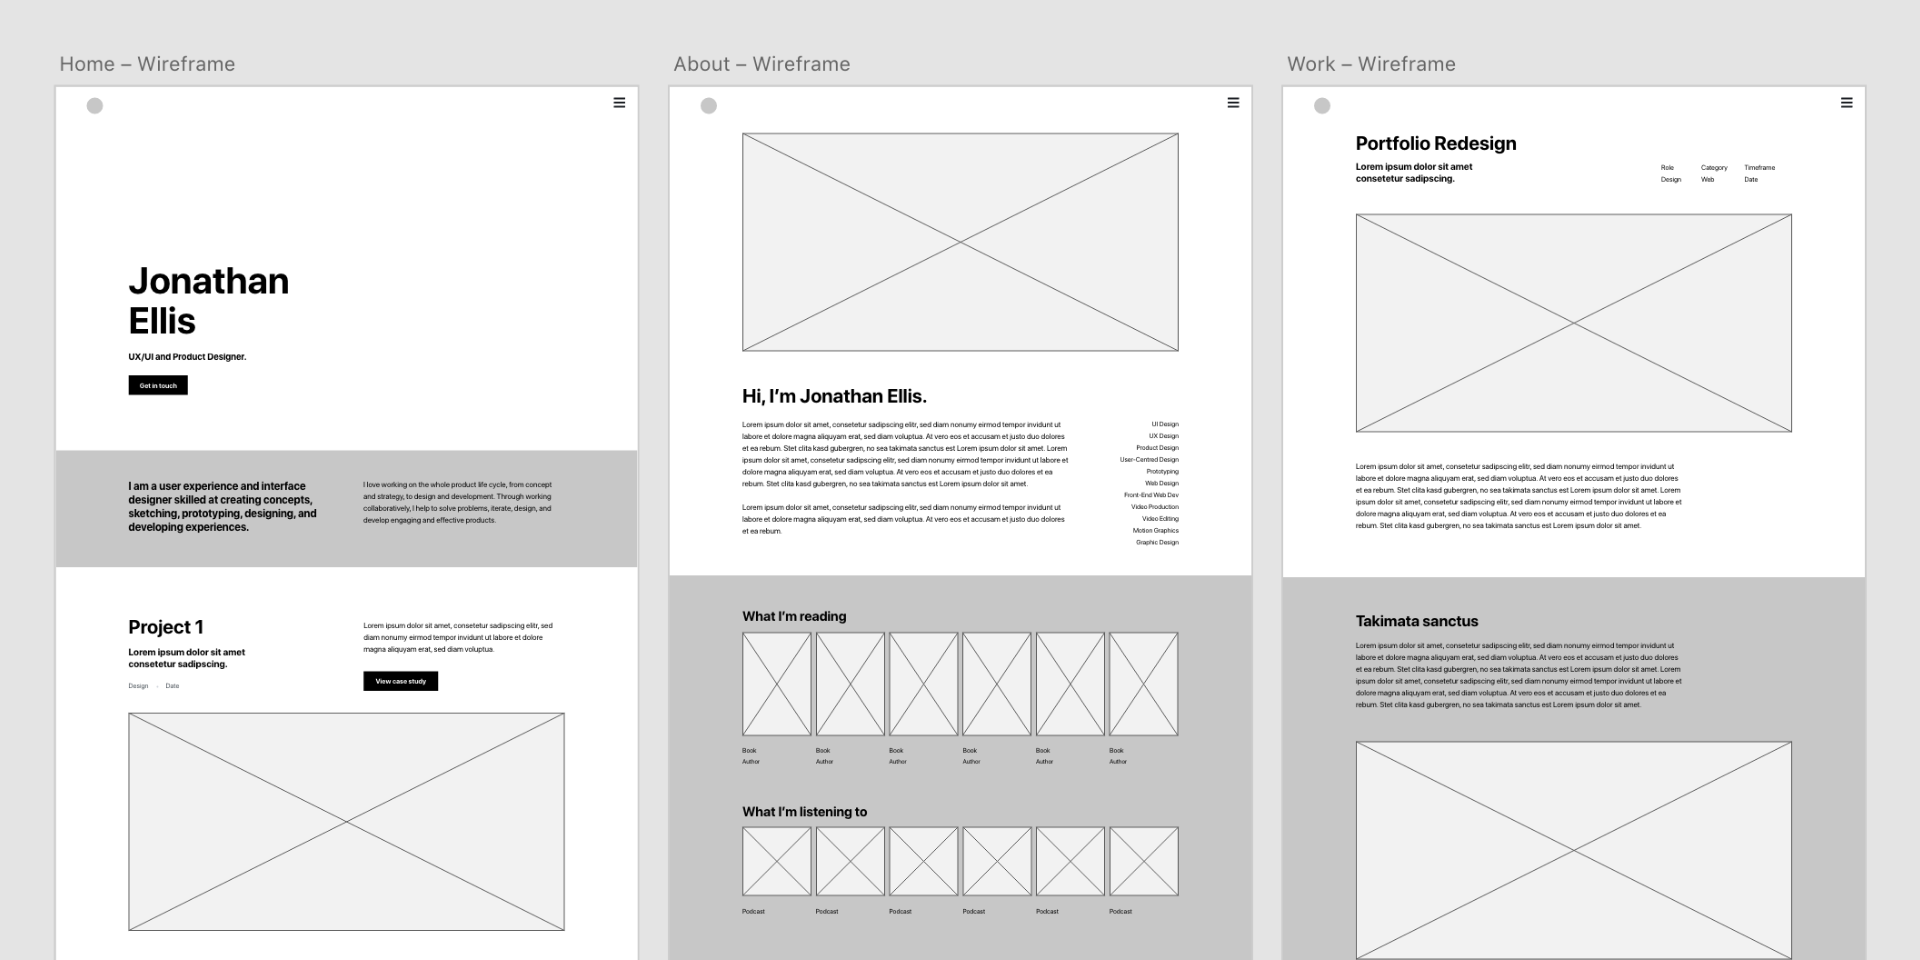 Wireframes for the new portfolio website - with the home, about, and work screens